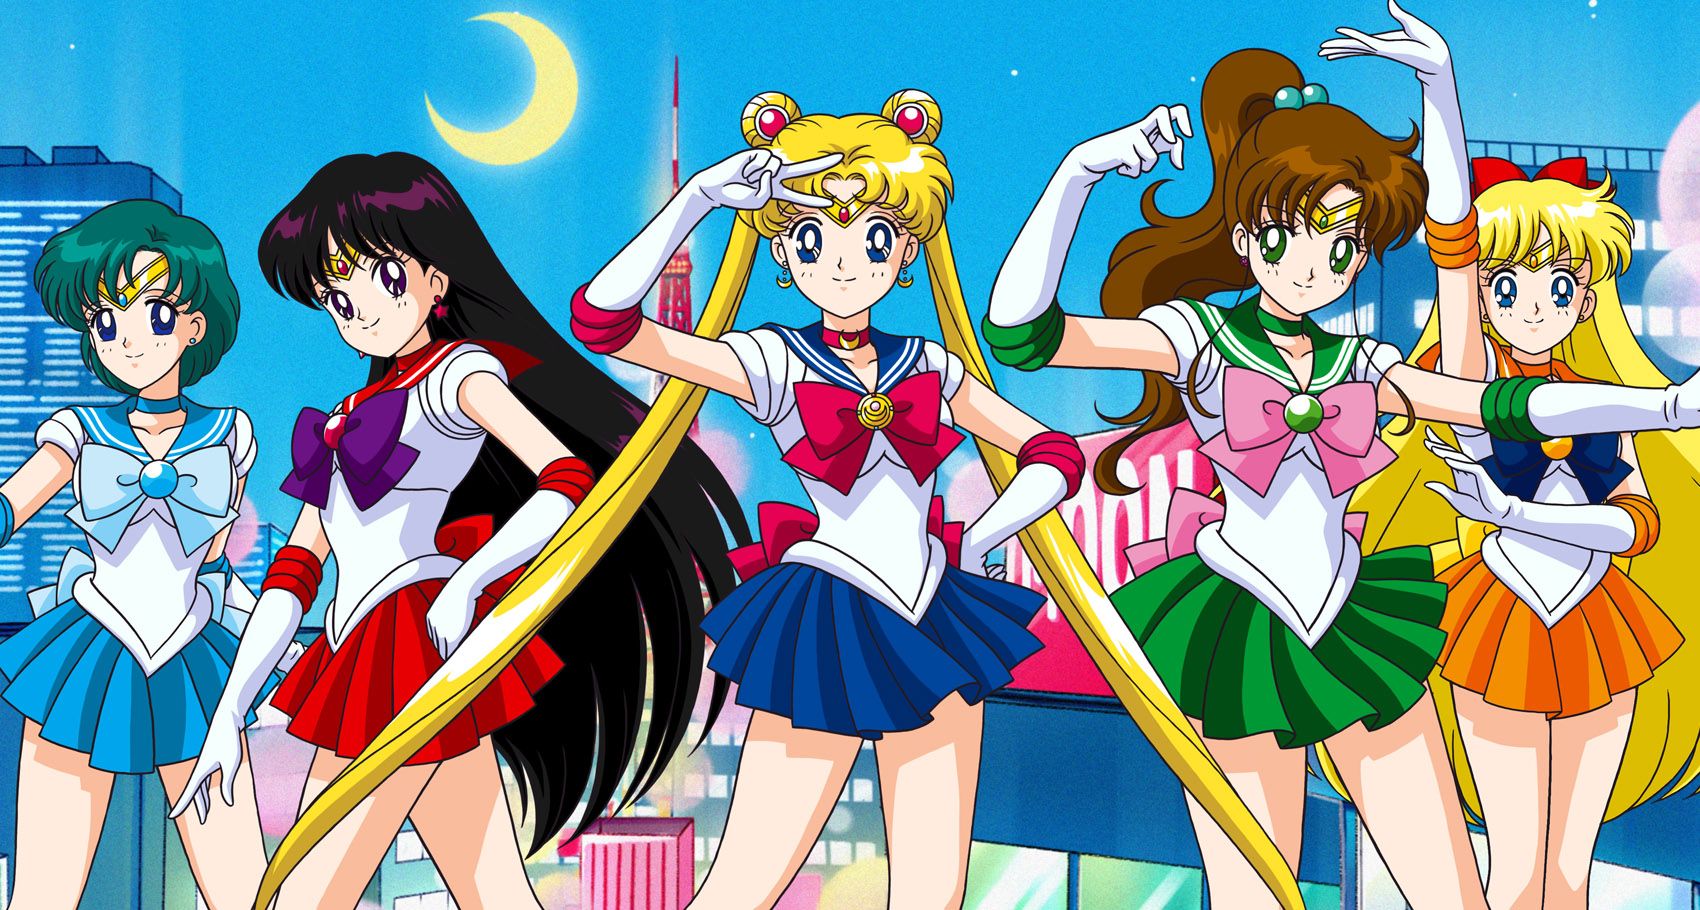 Sailor Scouts from Sailor Moon